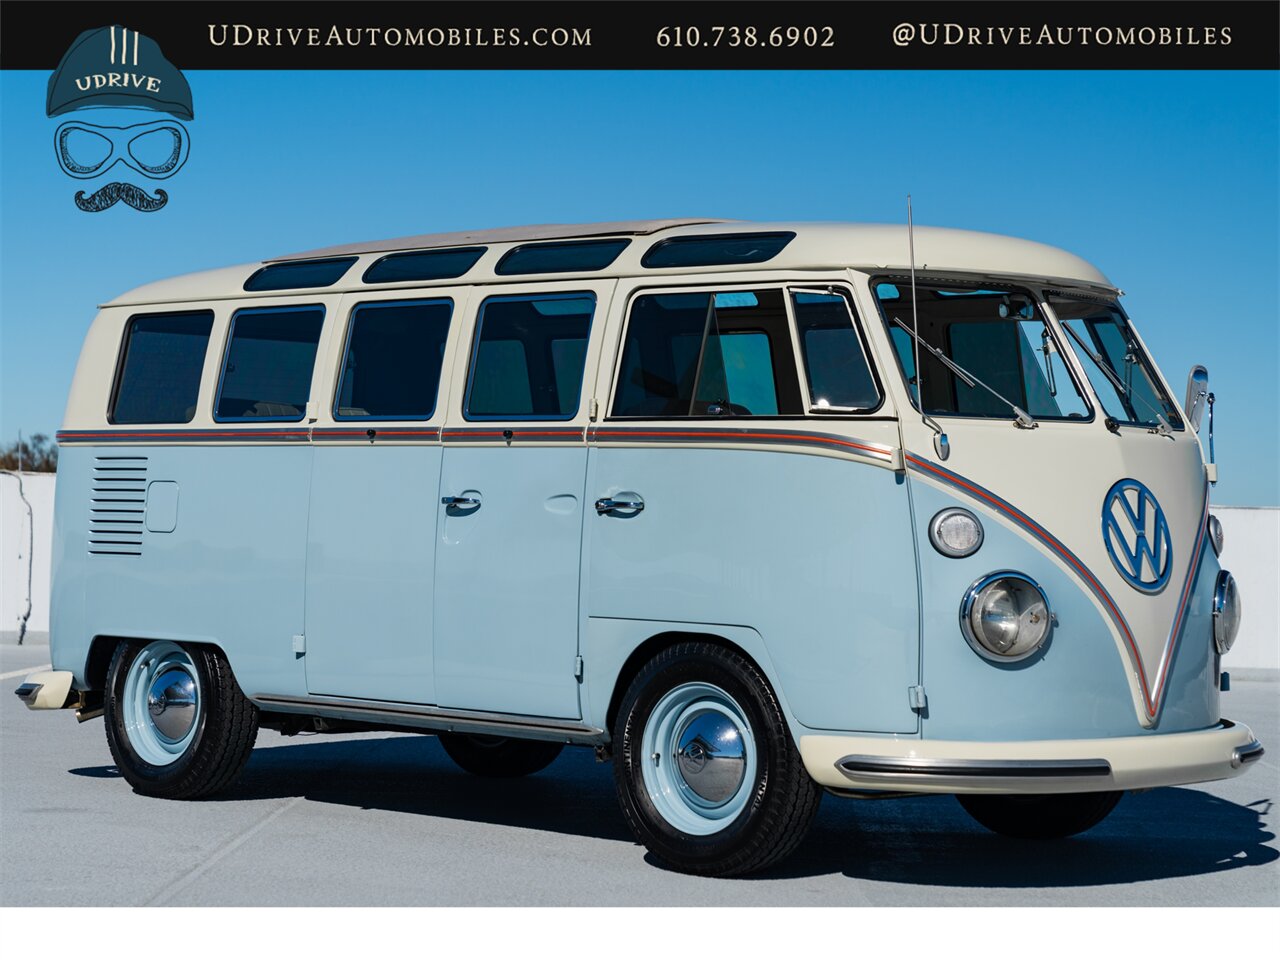 1965 Volkswagen Bus/Vanagon 21 Window Deluxe Transporter  Built By East Coast VW Restorations 1914cc A/C - Photo 15 - West Chester, PA 19382